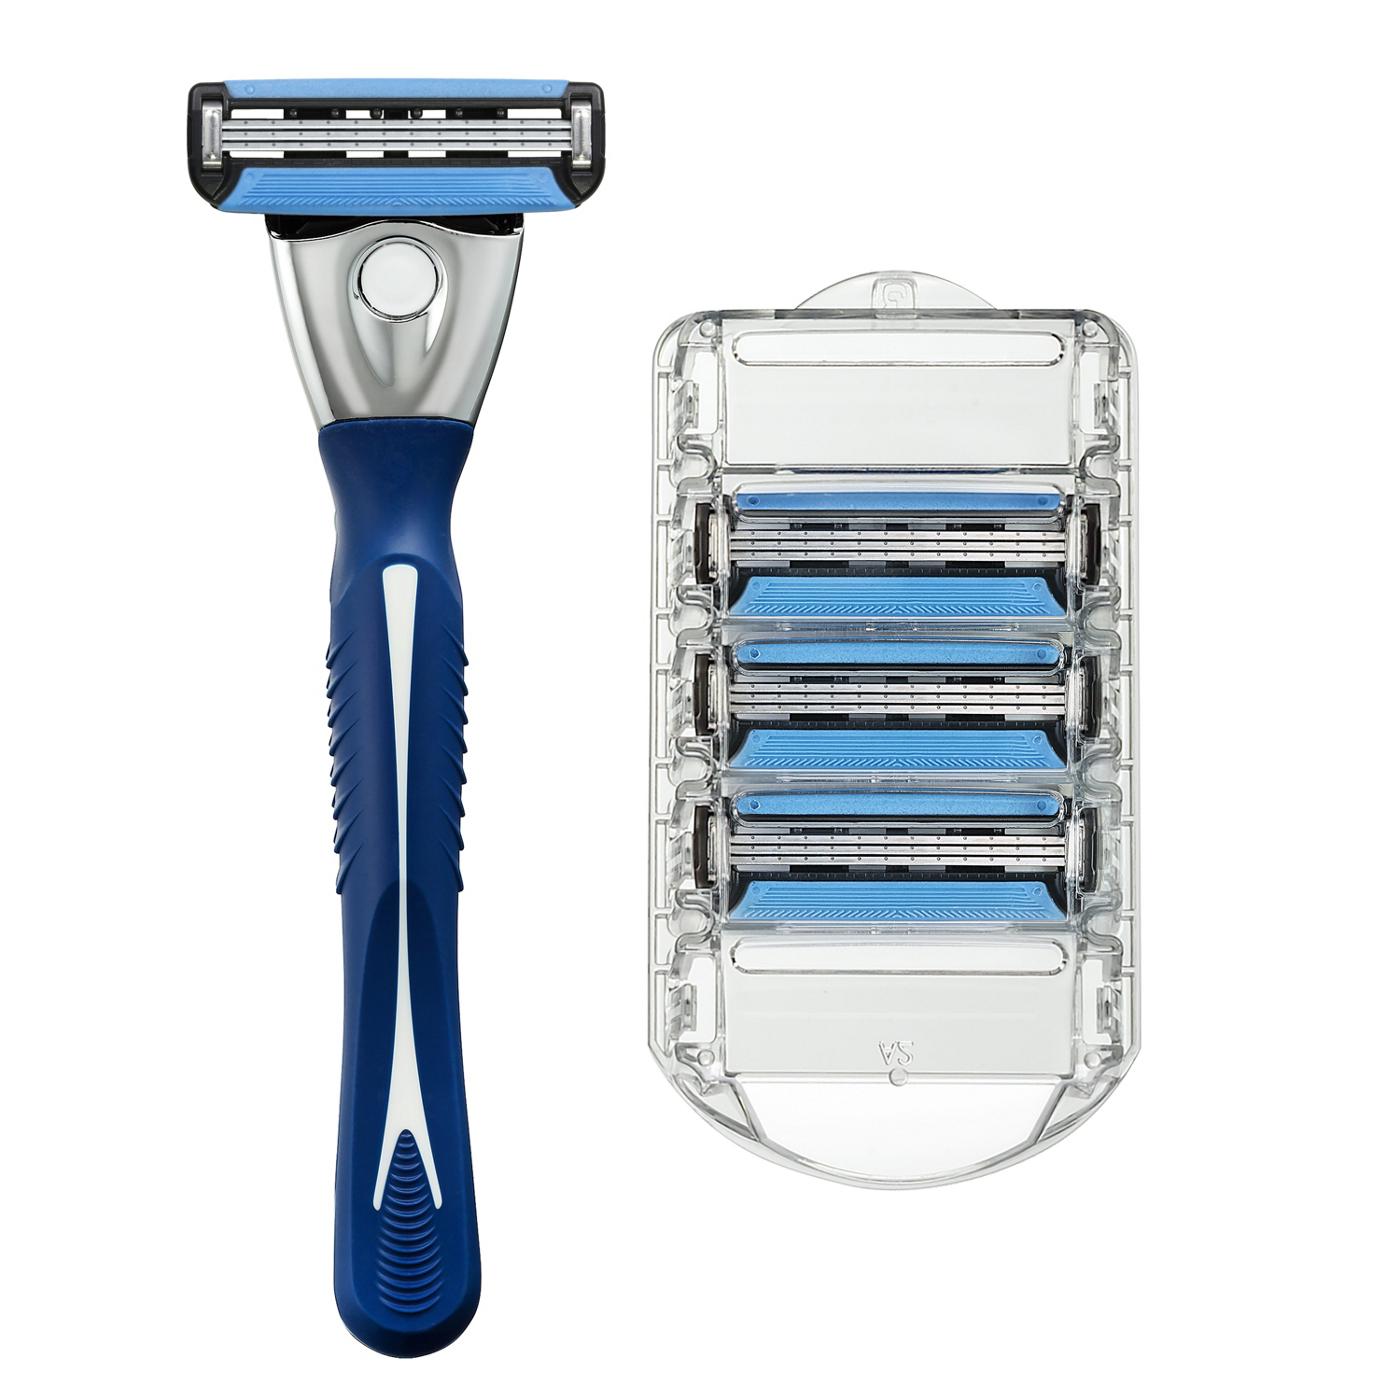 Hill Country Essentials Maxus3 Triple Blade Razor Value Pack with Refill Cartridges; image 2 of 5